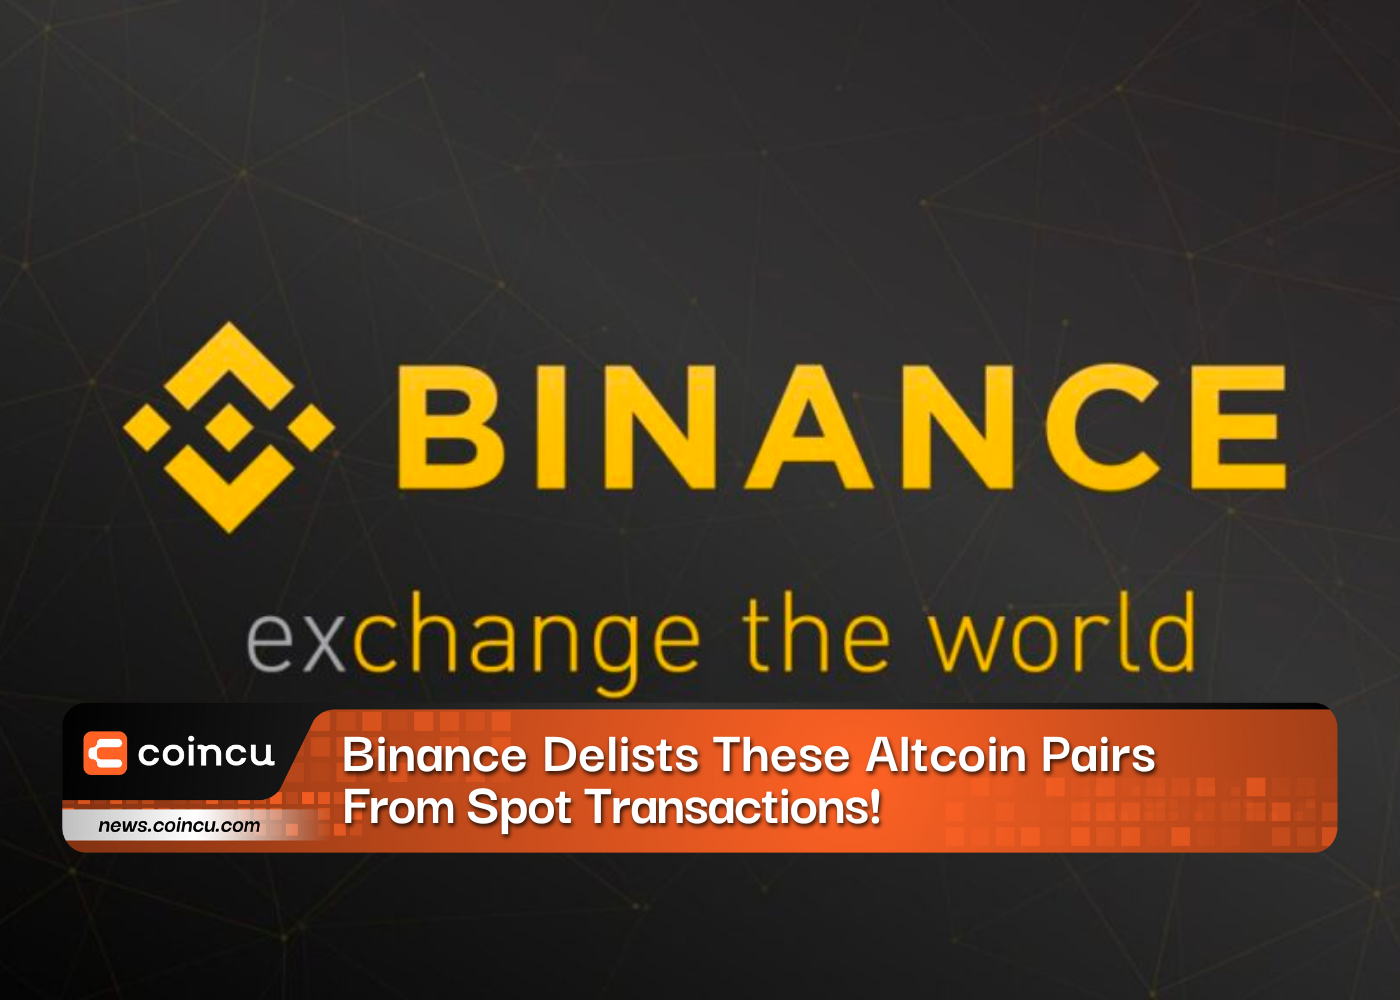 Binance Delists These Altcoin Pairs